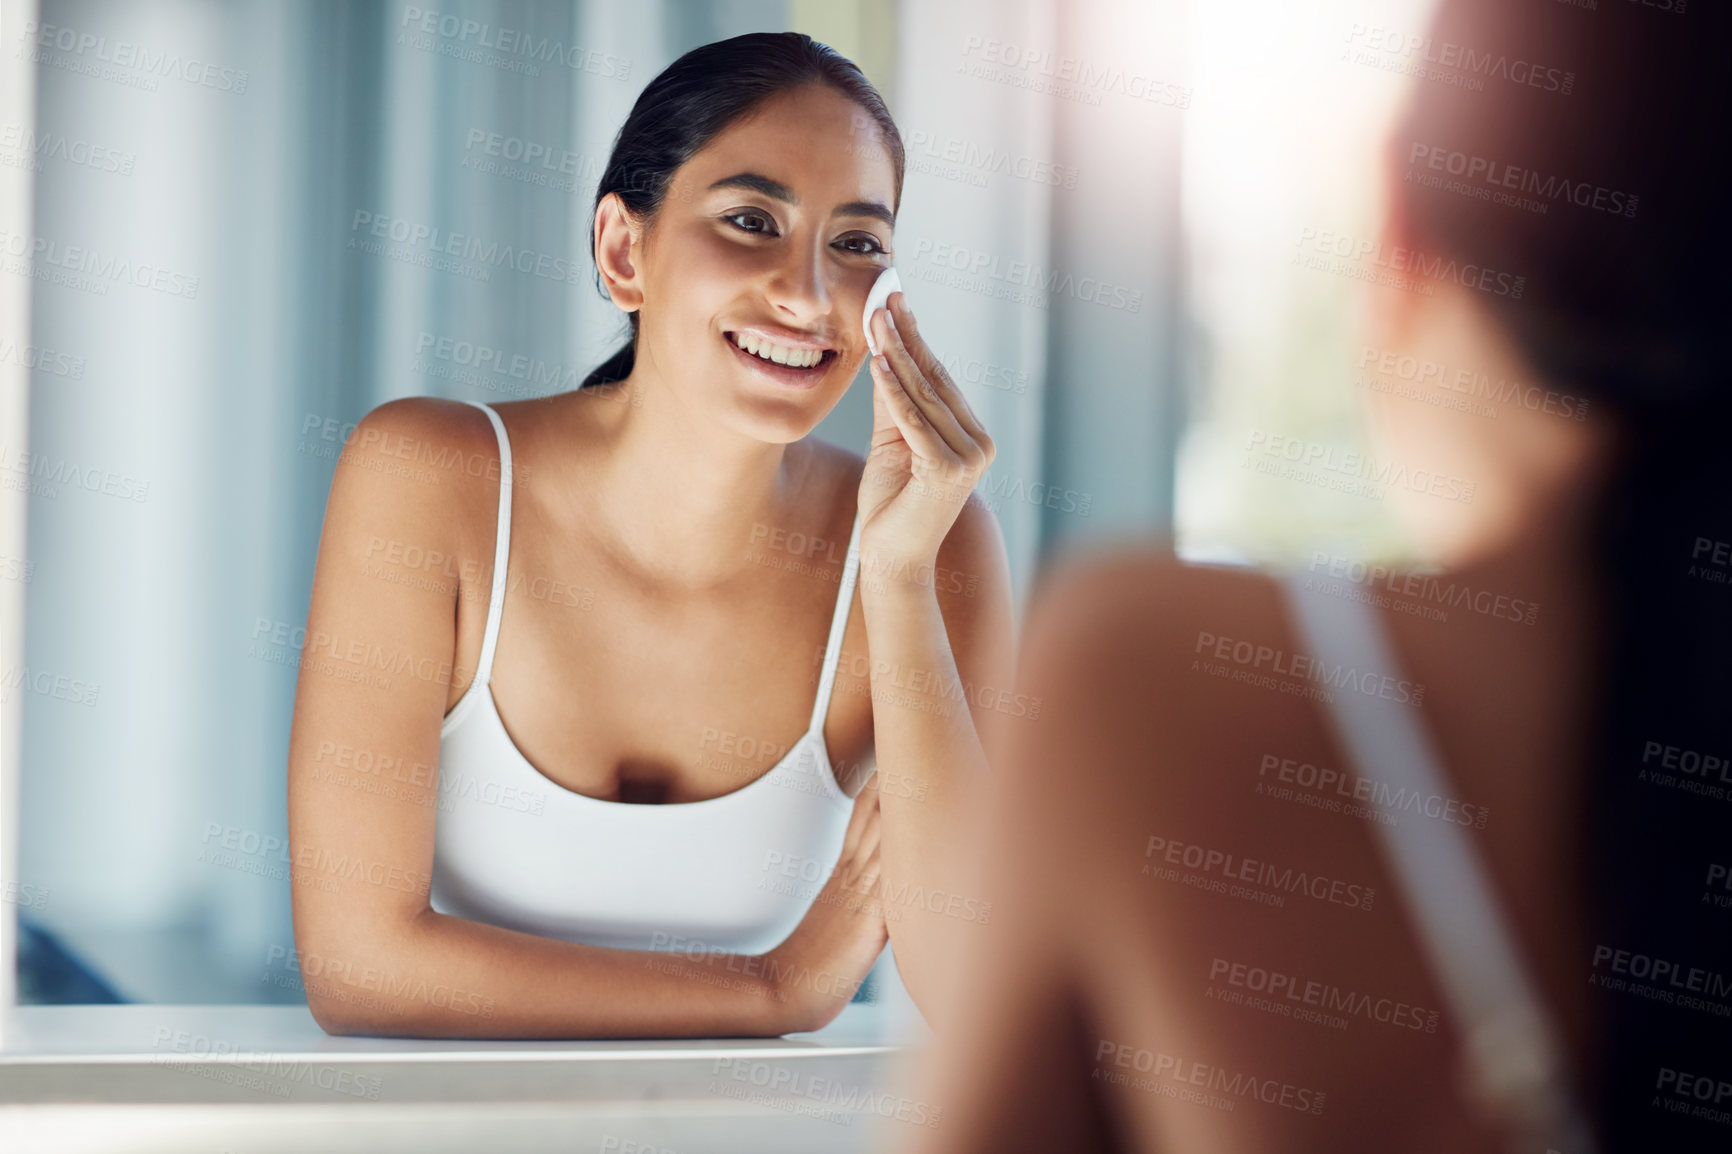 Buy stock photo Shot of a beautiful young woman cleaning her face with cotton wool in the bathroom mirror